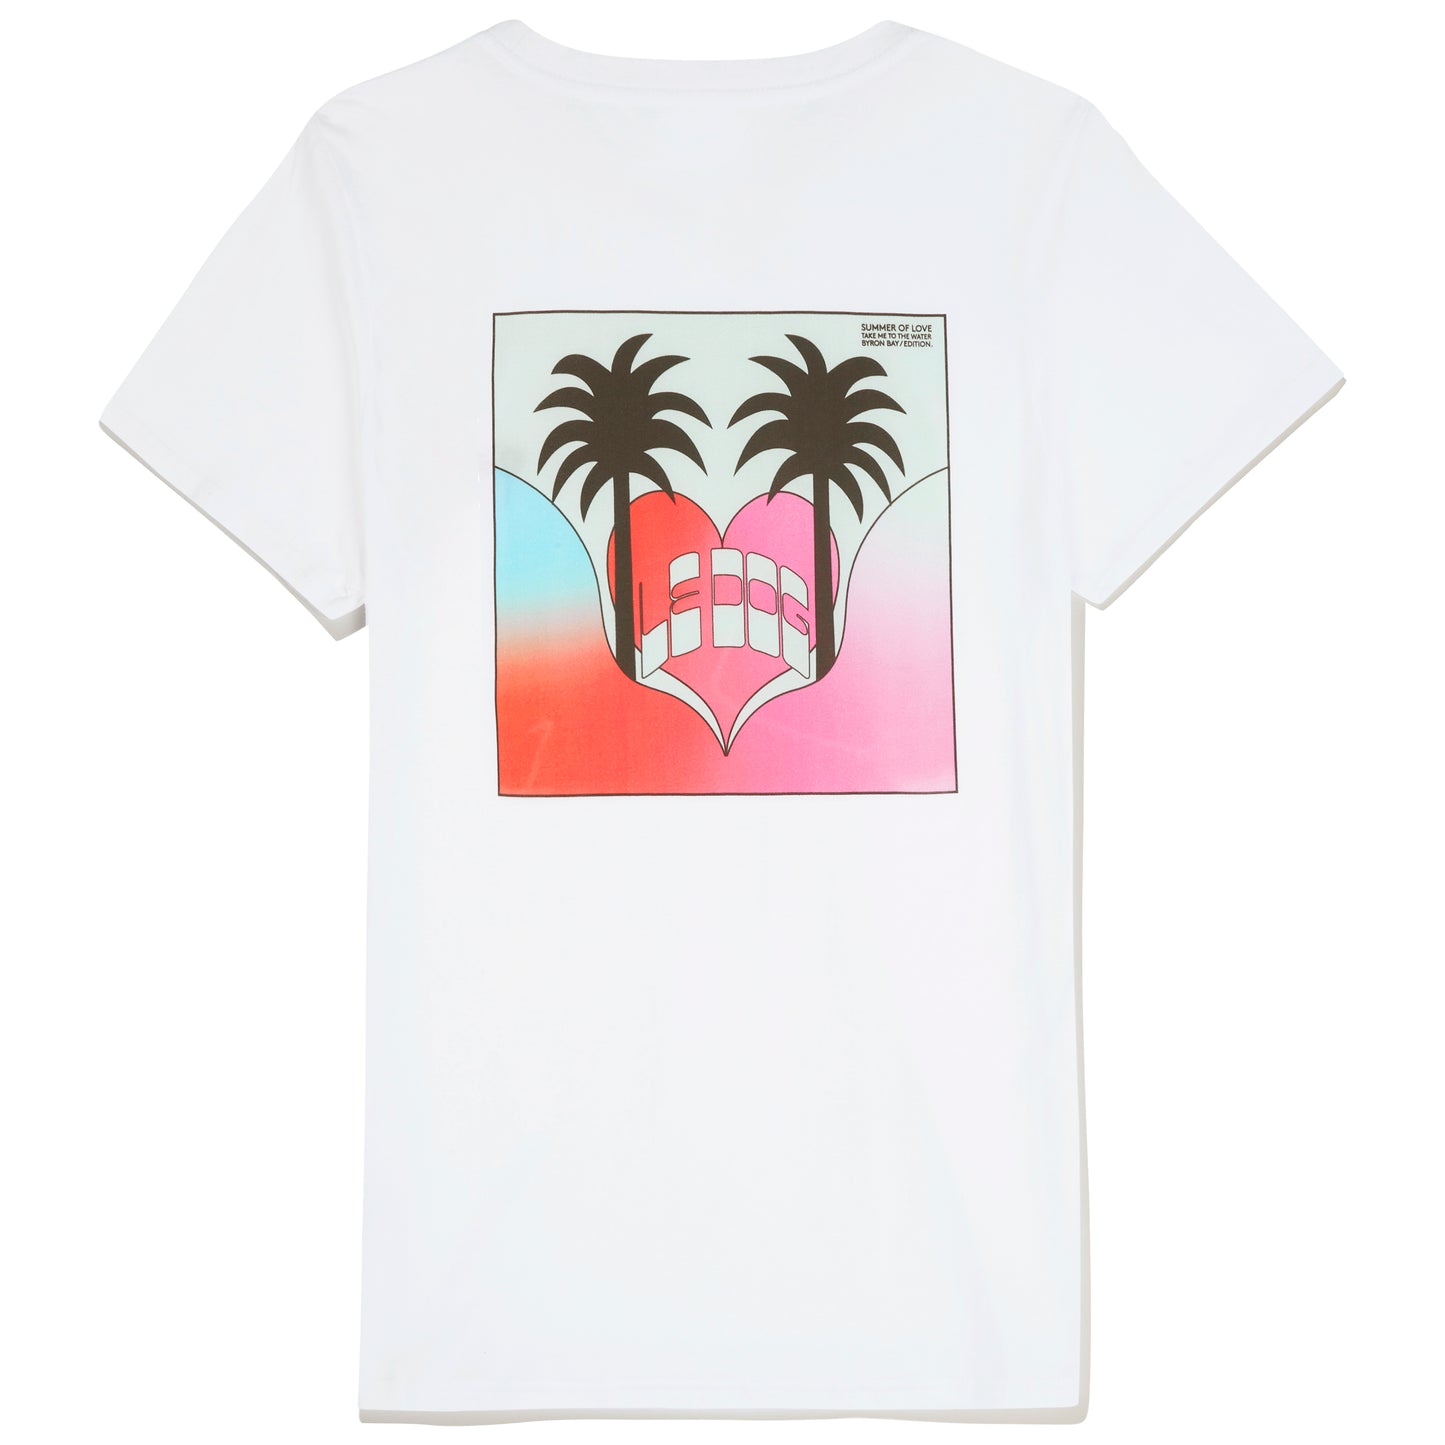 Le Dog Summer of Love Tee - Limited Edition